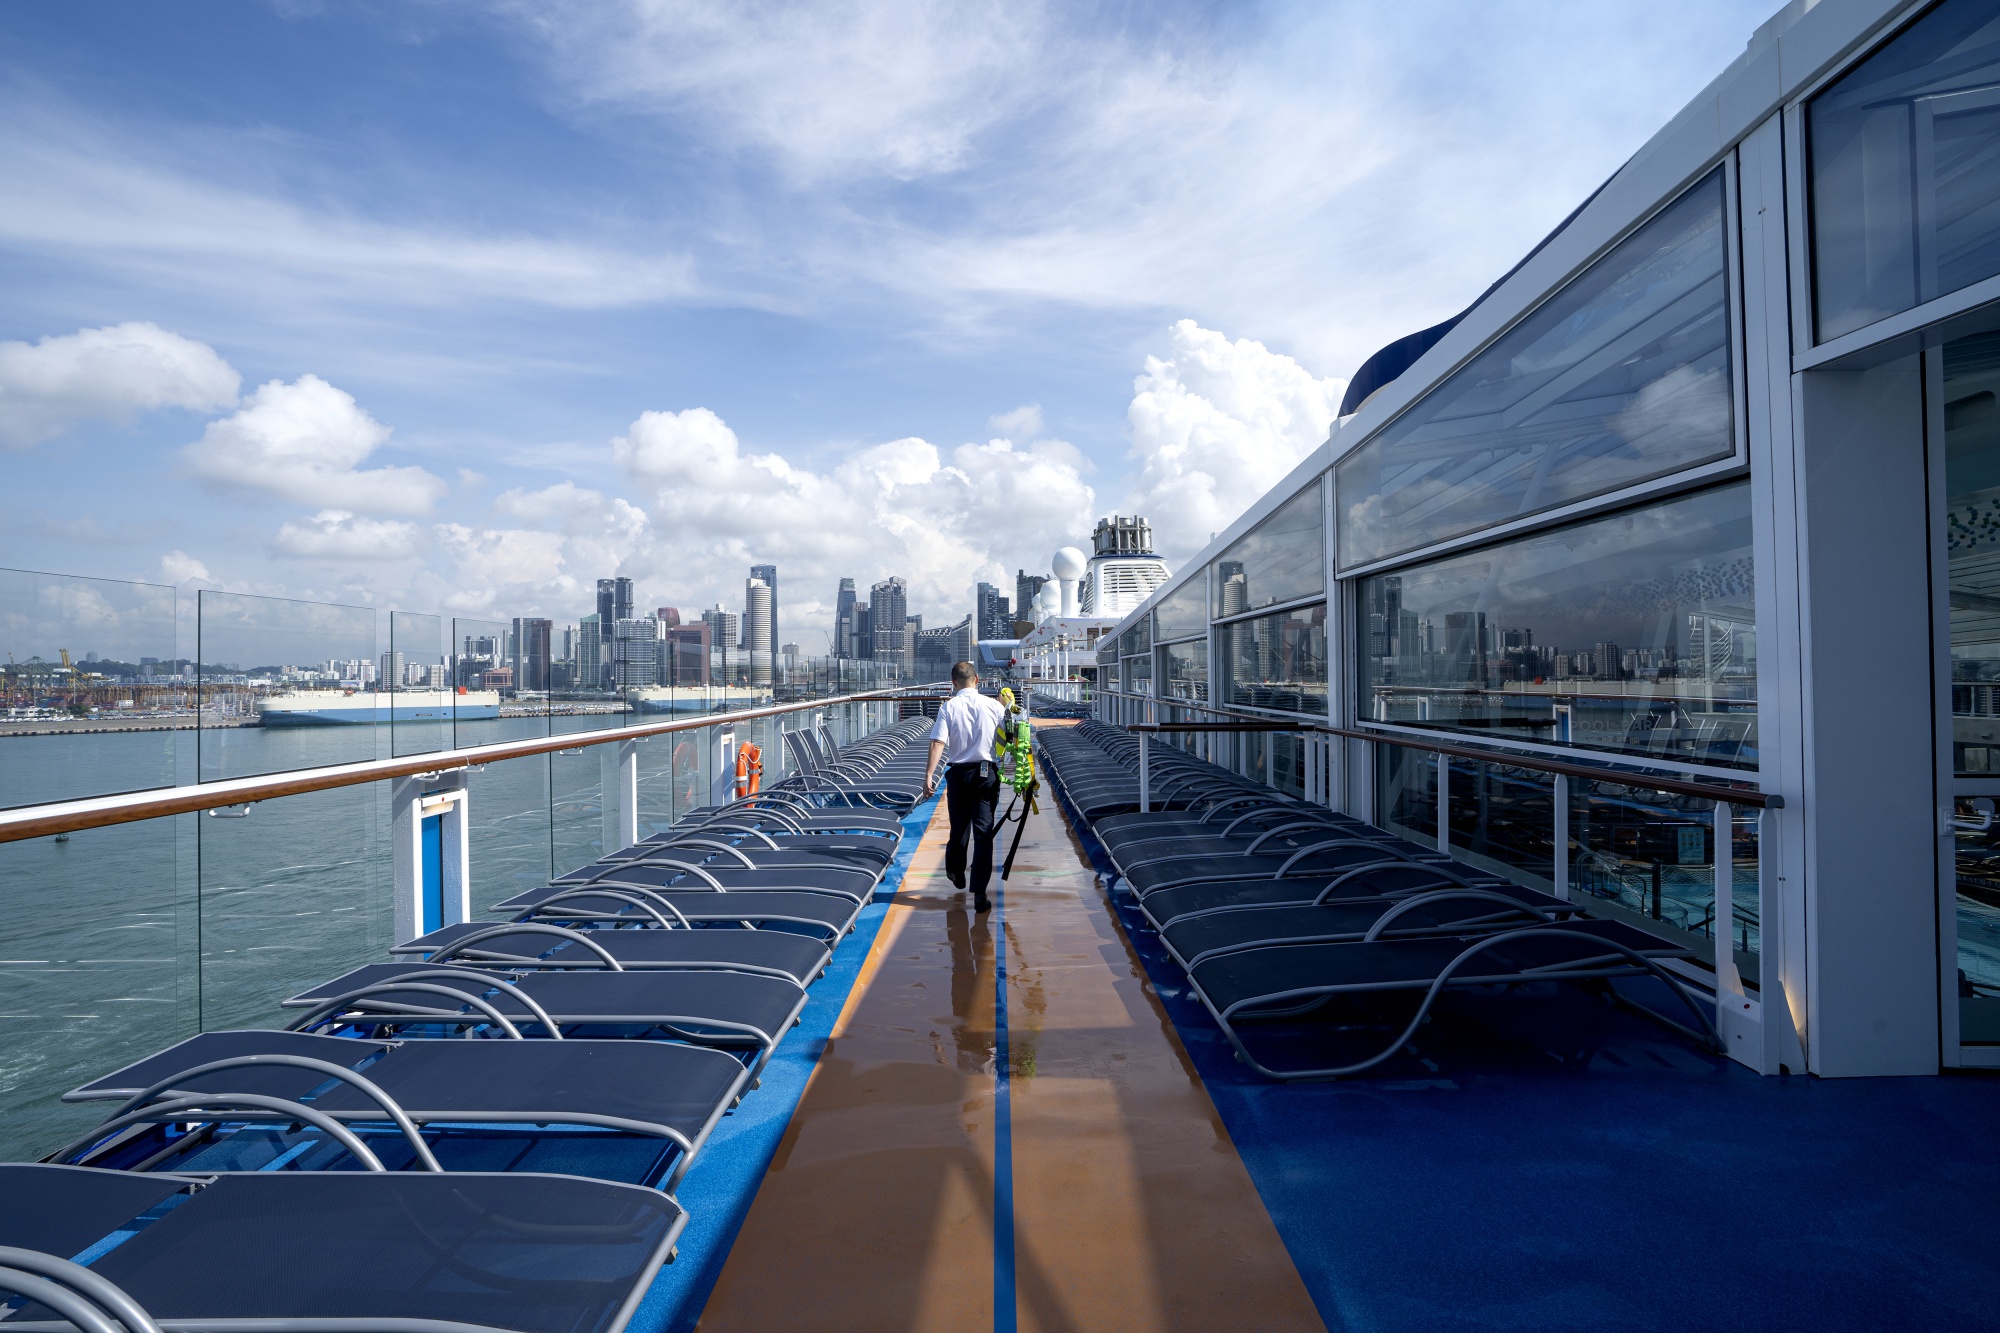 Onboard the Spectrum of the Seas Cruise Liner